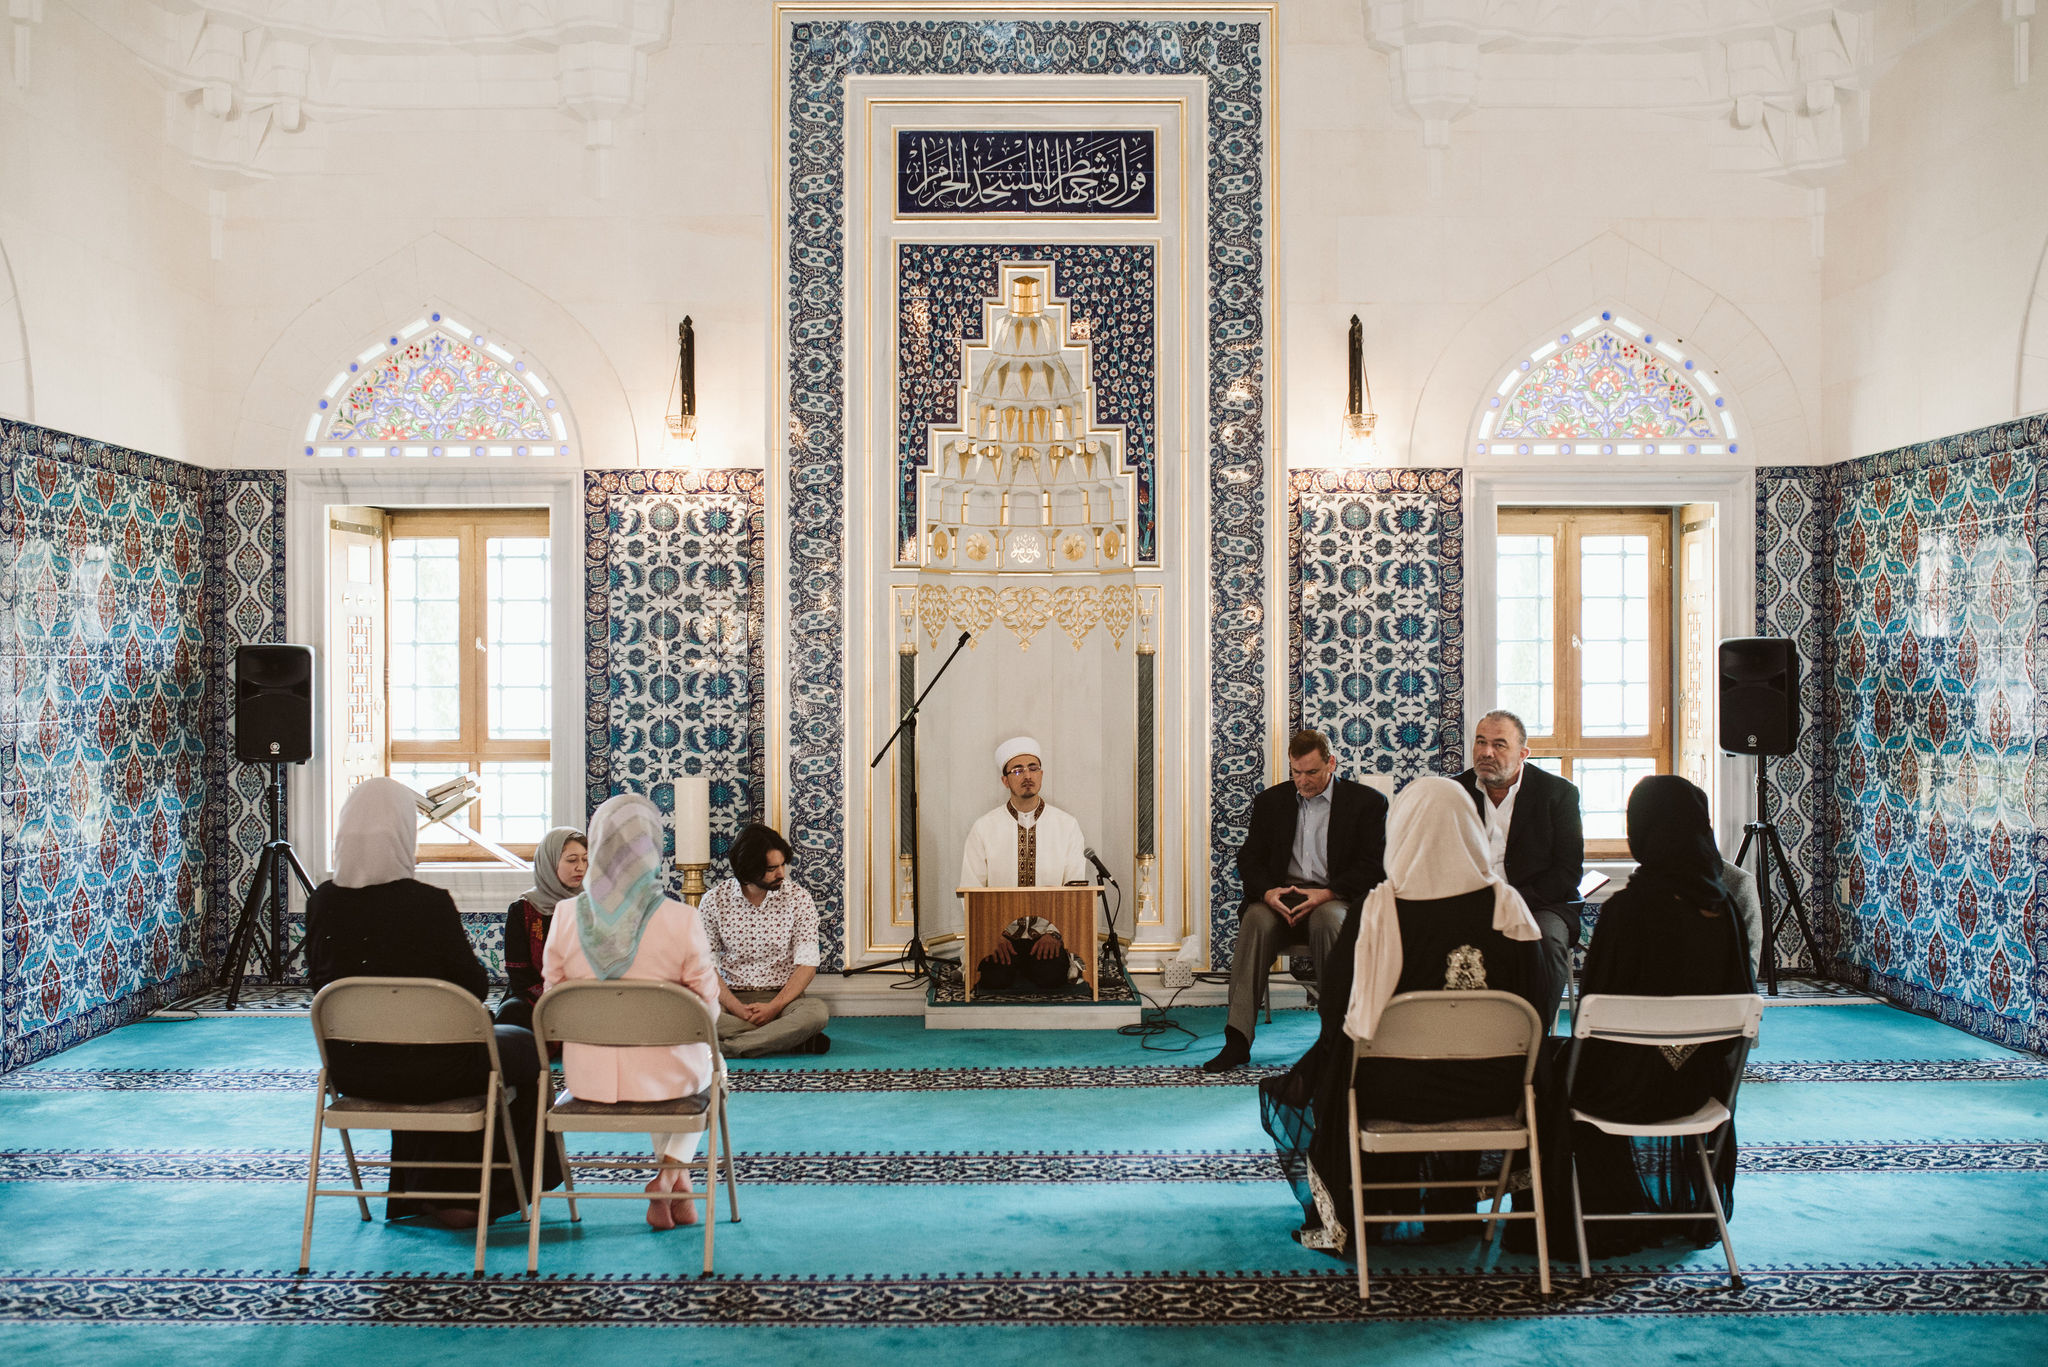  Washington DC, Baltimore Wedding Photographer, Diyanet Center of America, Spring, Intimate Wedding, Traditional, Classic, Palestinian, Turkish Design, Bride and Groom Seated with Family 